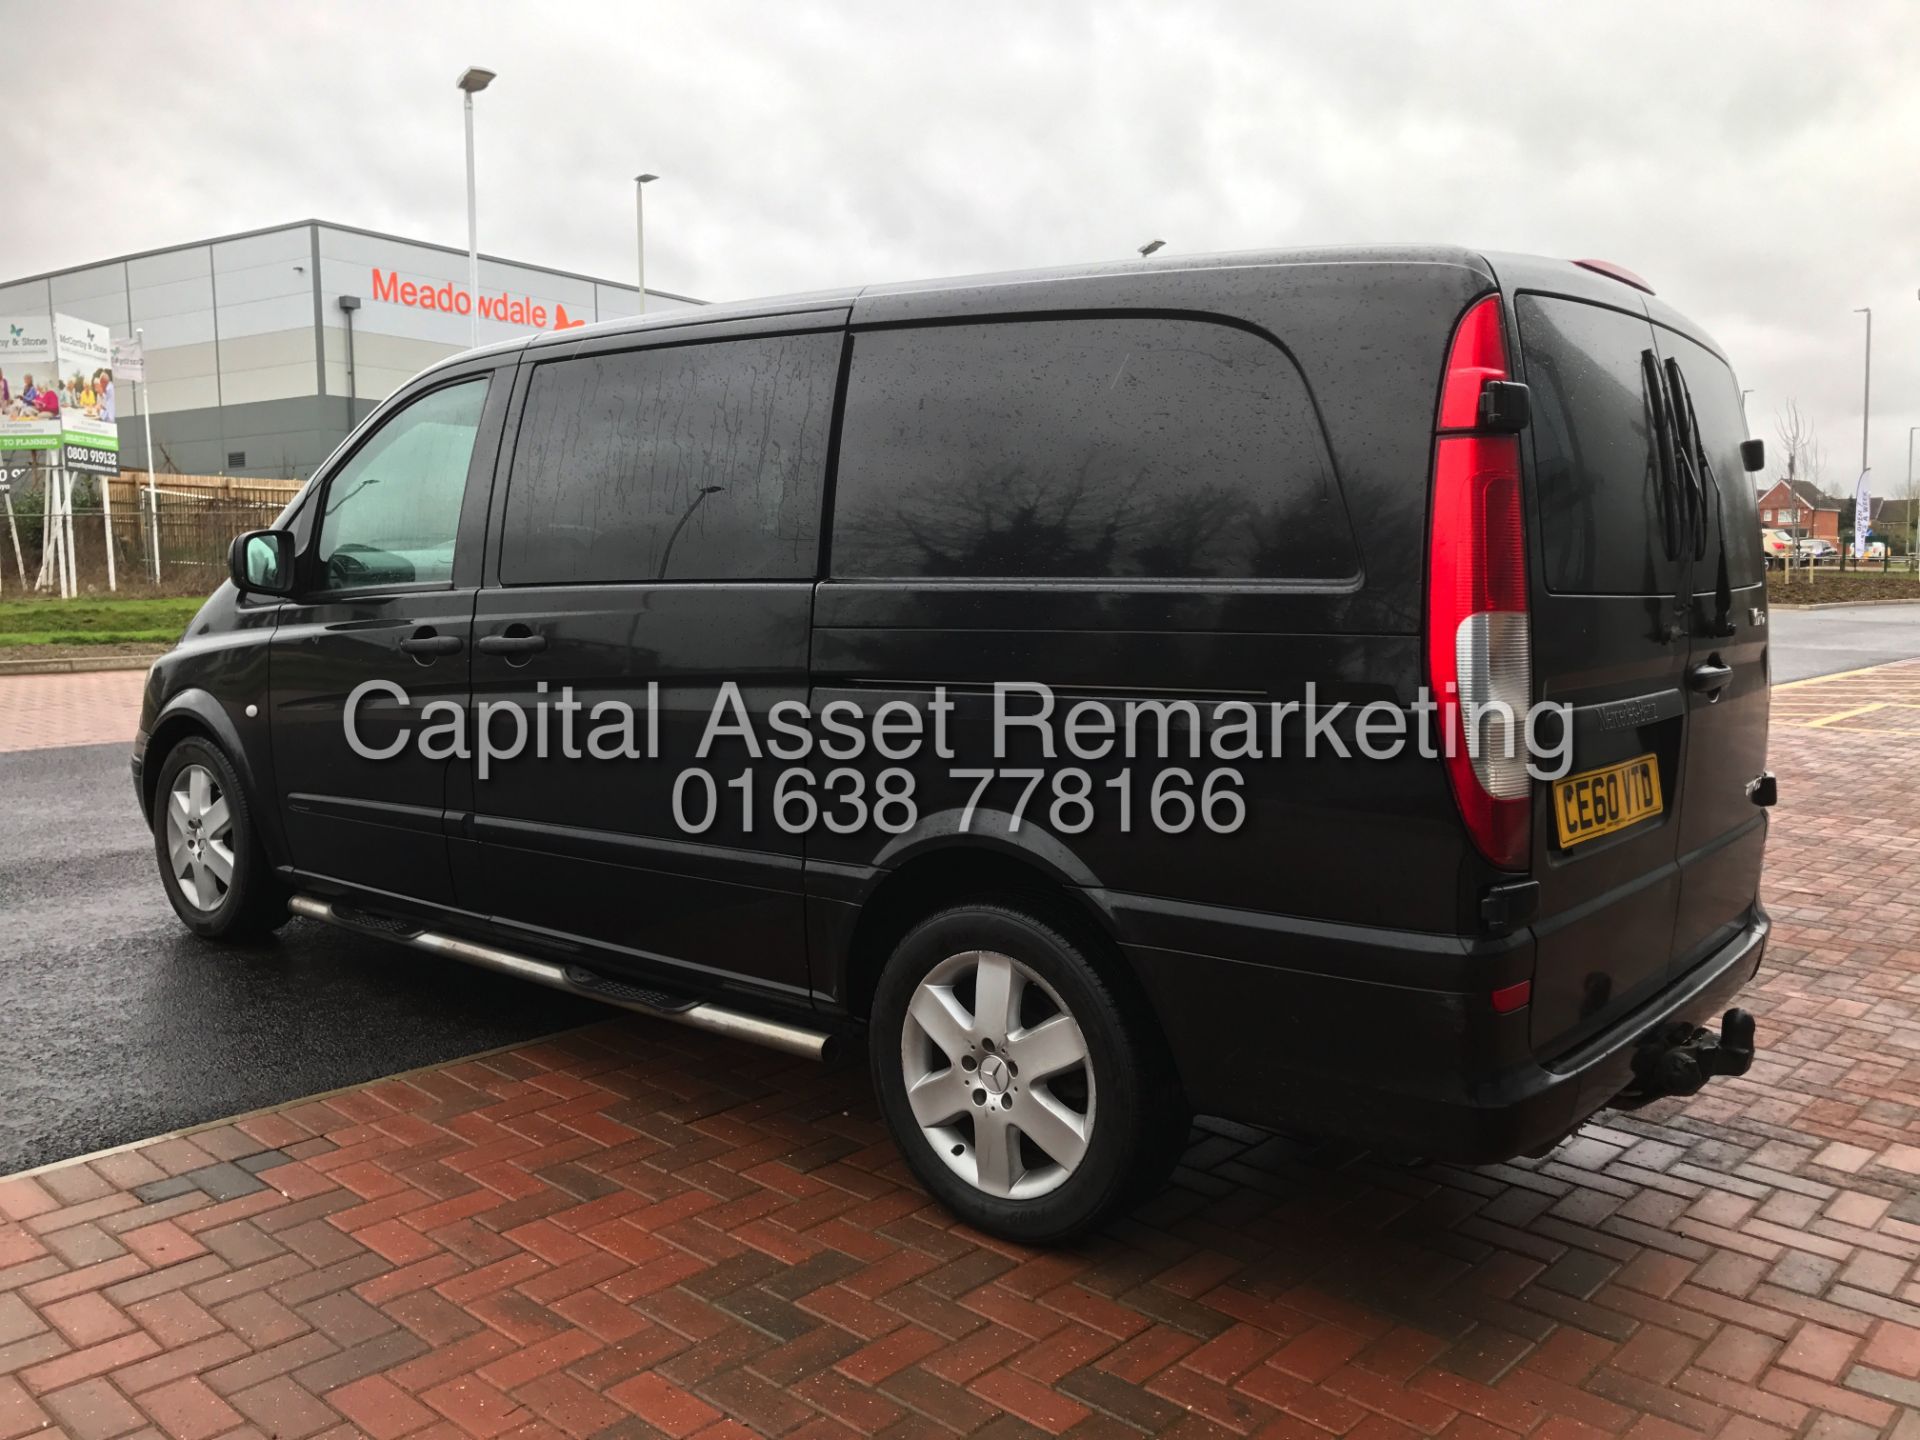 (ON SALE) MERCEDES VITO "SPORTY - 115BHP" LWB (2011 MODEL) 5 SEATER DUELINER -1 OWNER-AIR CON-ALLOYS - Image 7 of 18